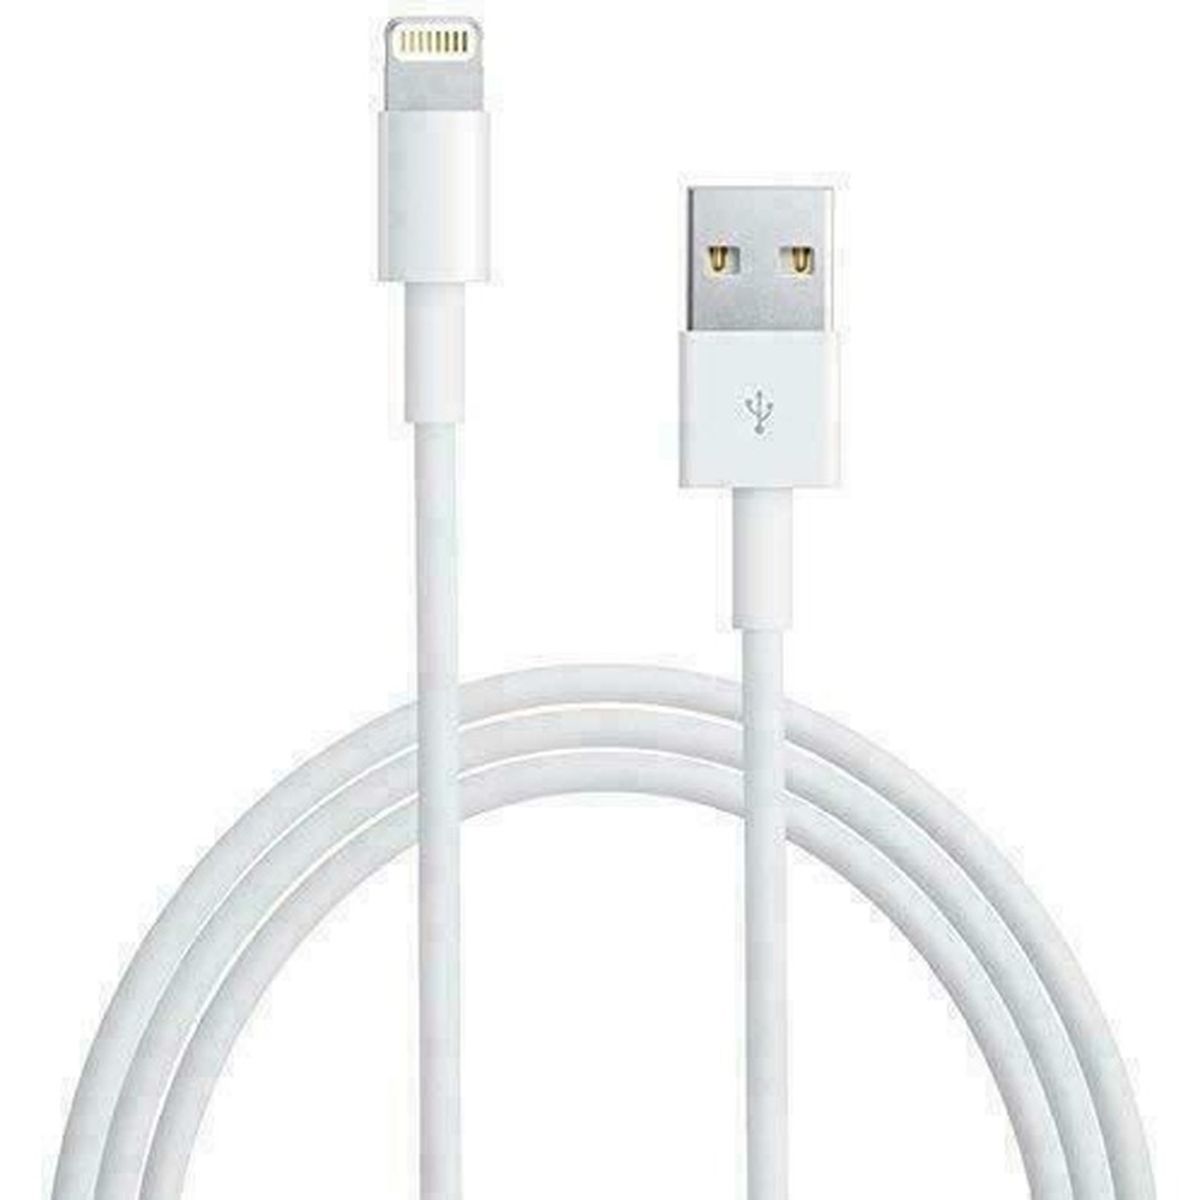 1 CHARGEUR IPHONE 5 5C 5S 6 6 6S IPAD CABLE TELEPHONE BLANC 